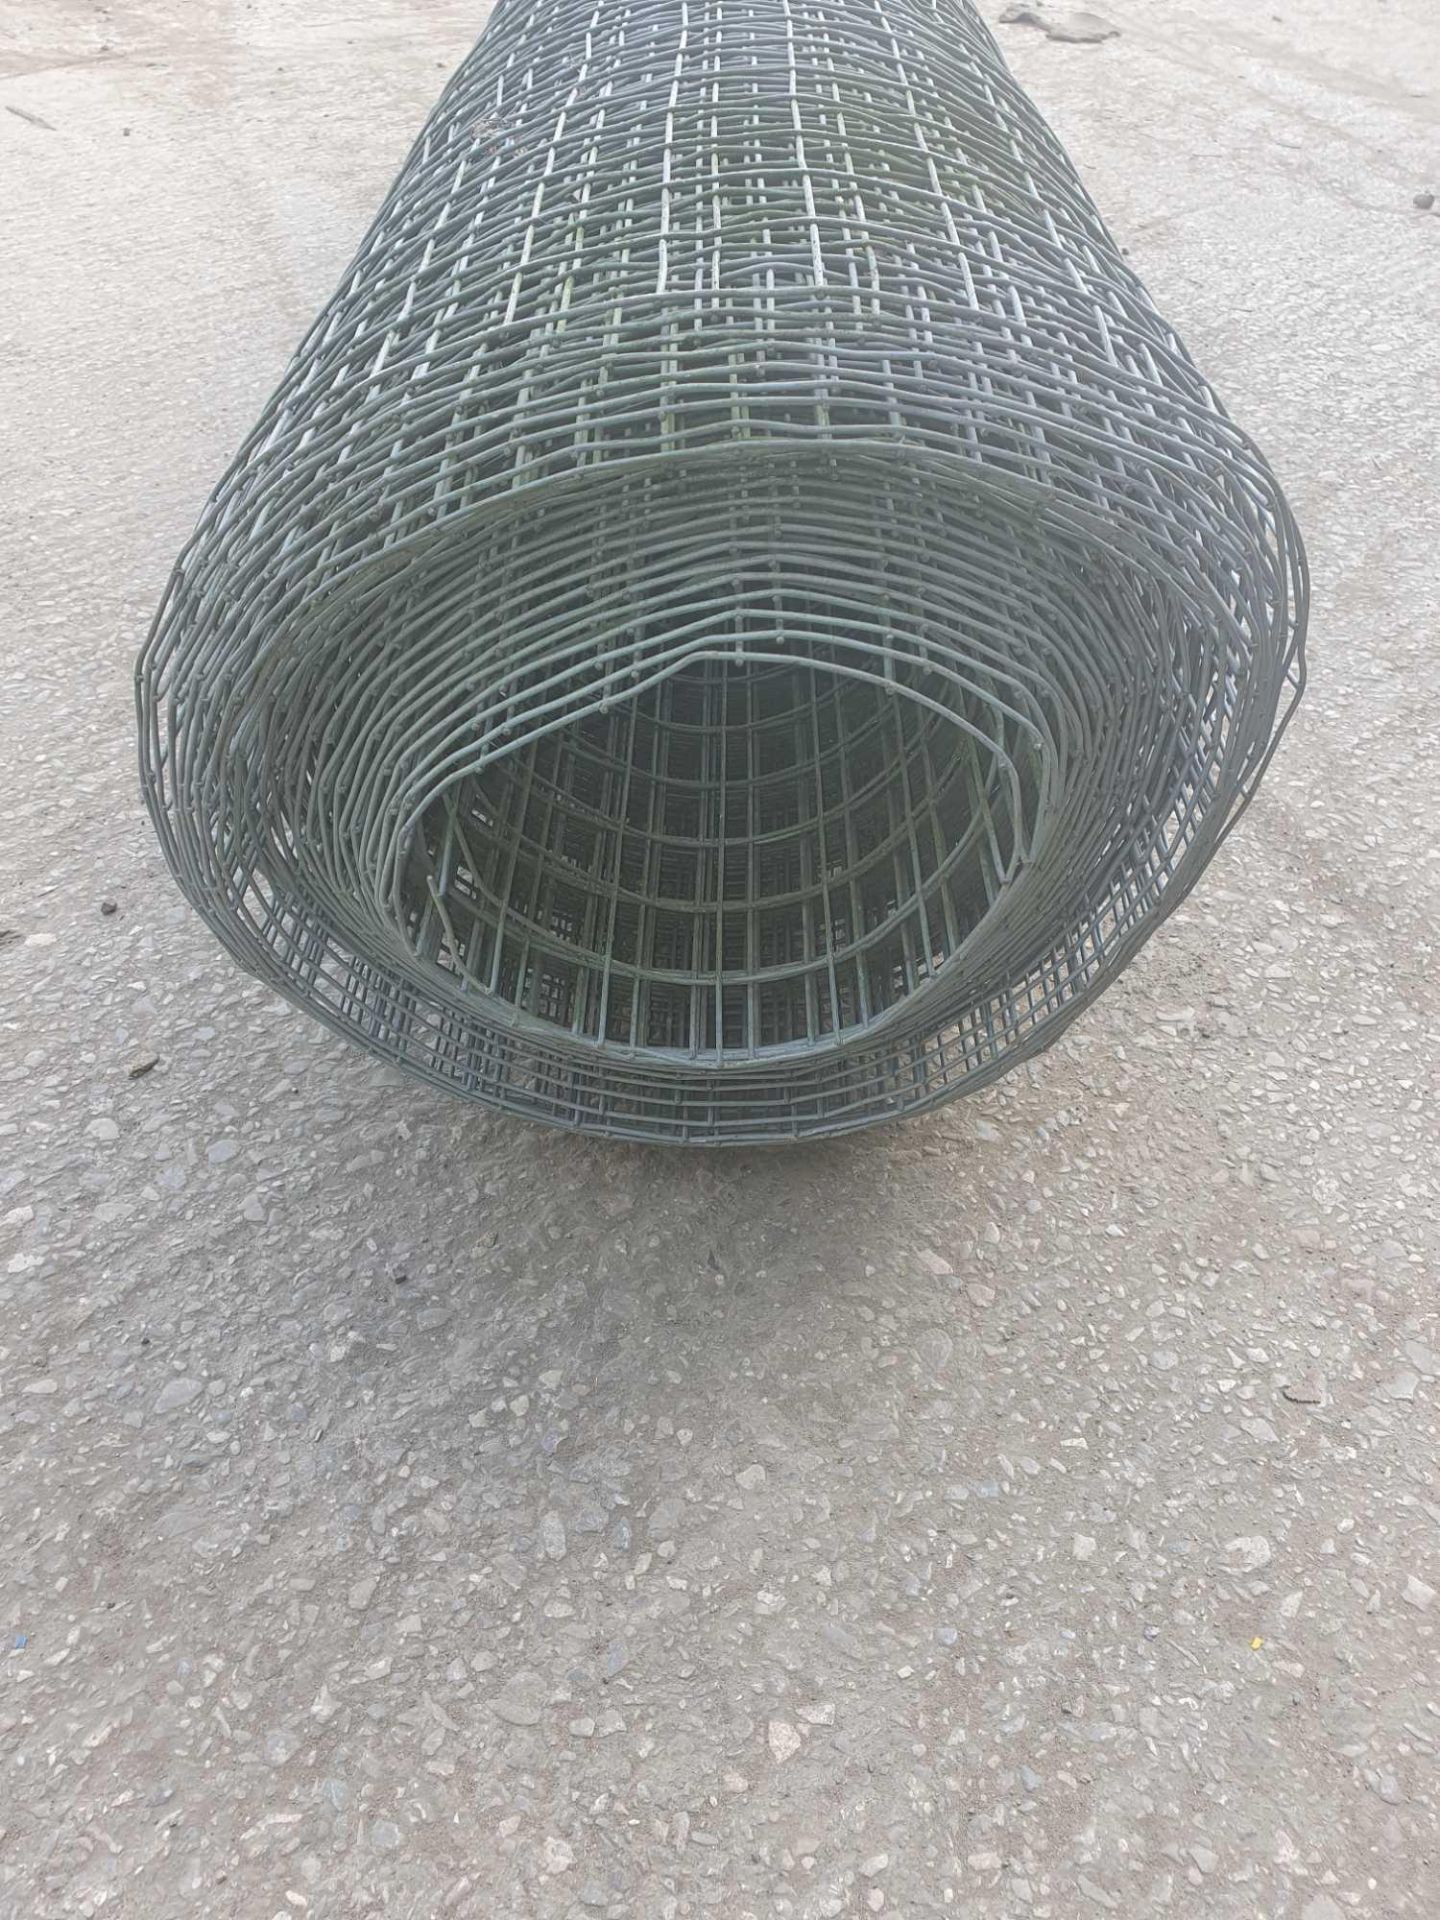 Roll of wire mesh - Image 2 of 2